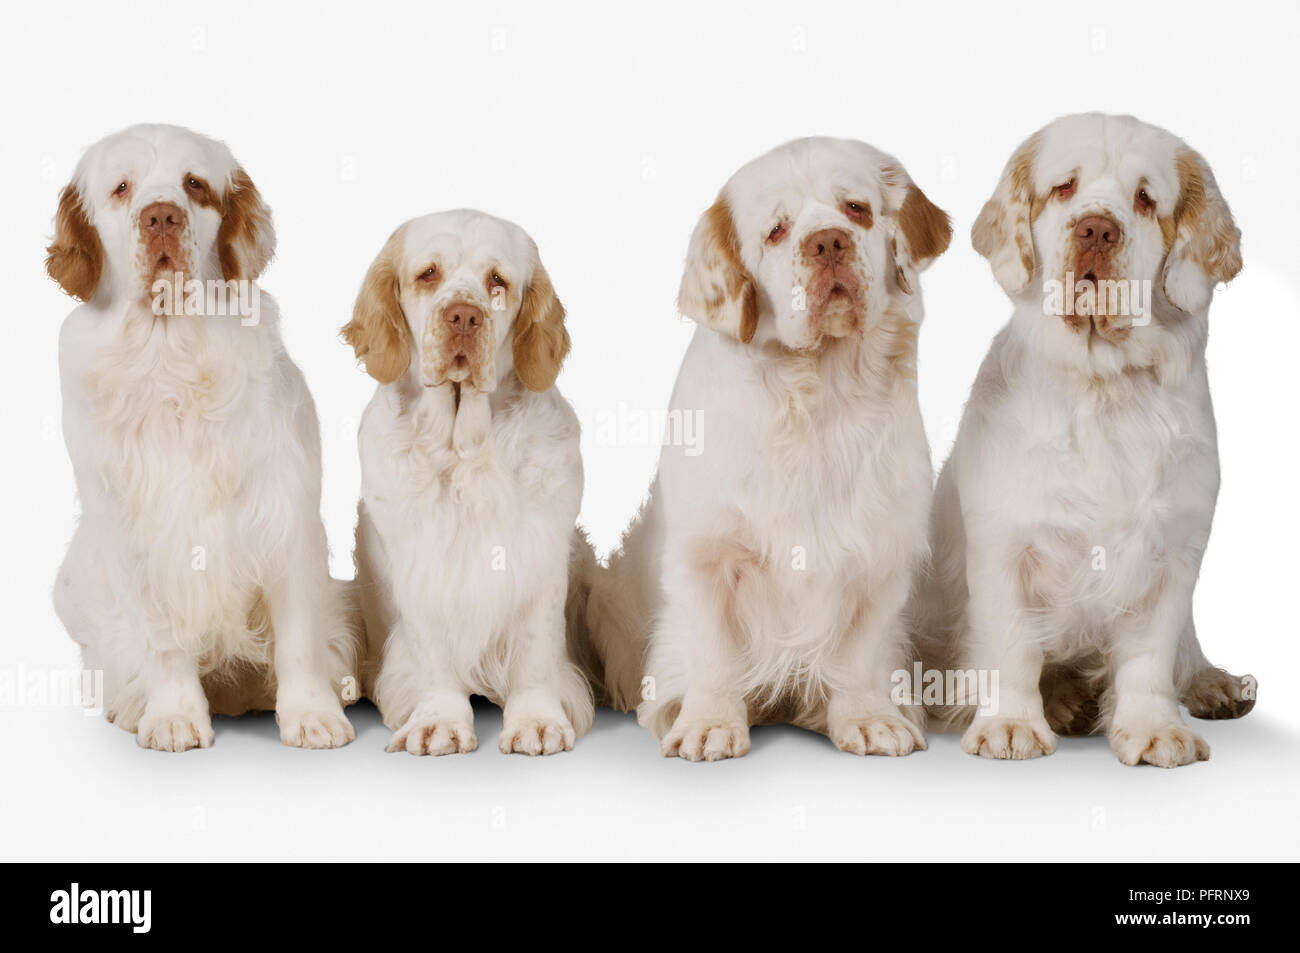 Row of white and lemon Clumber Spaniel dogs Stock Photo